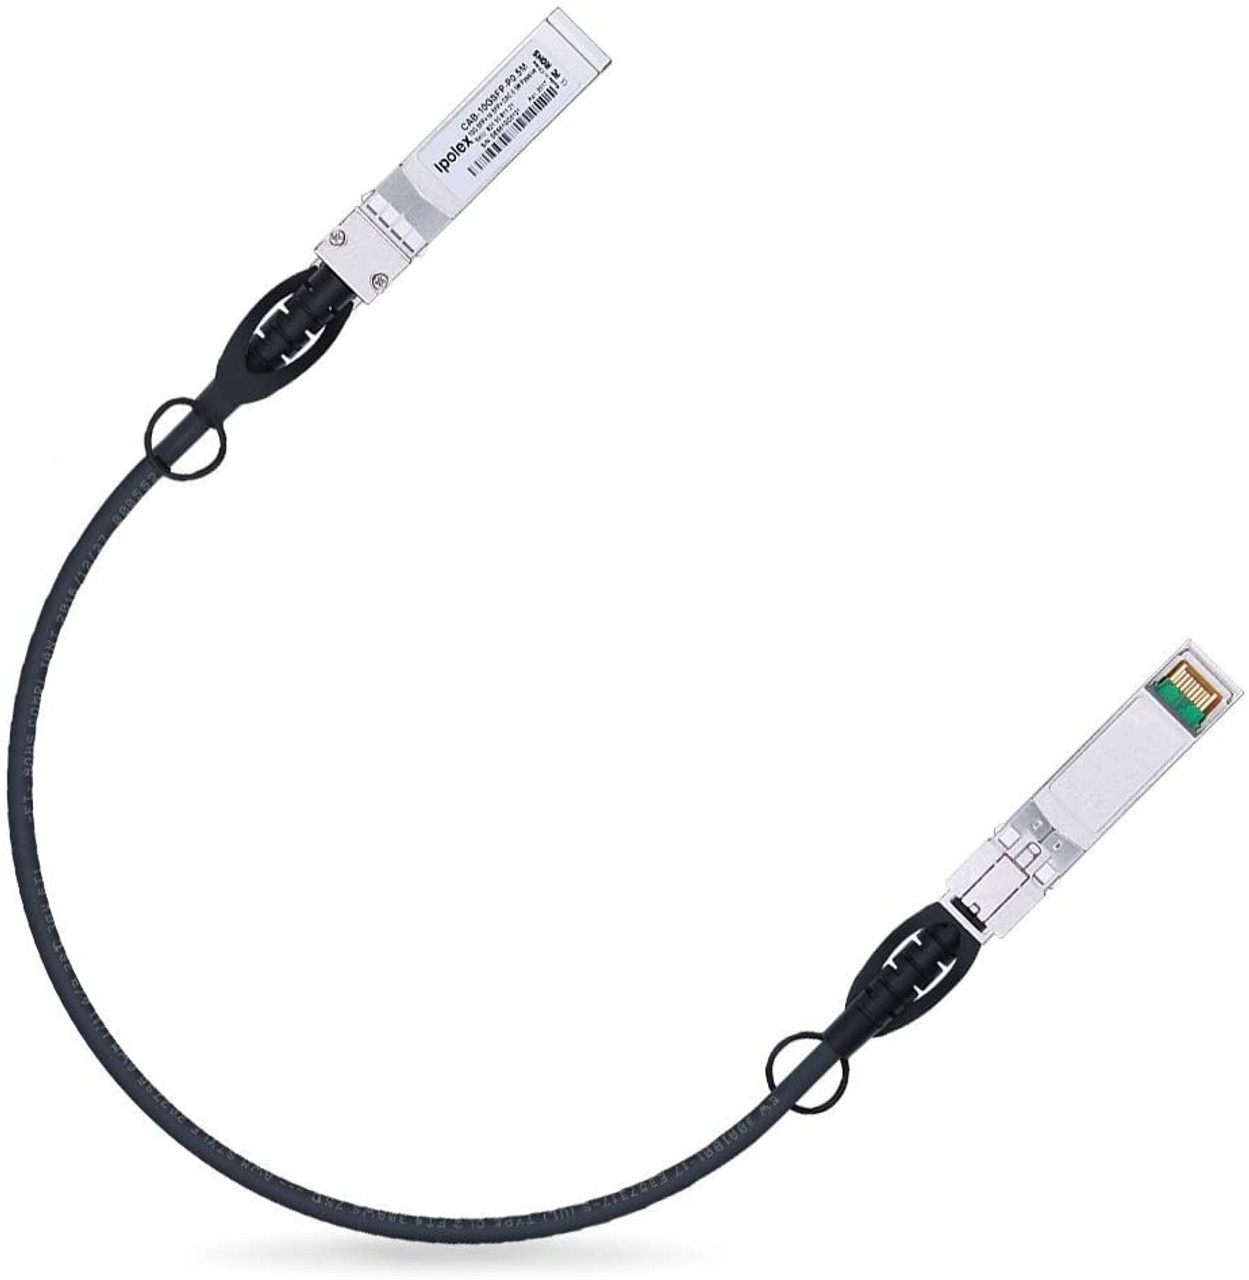 100% Cisco SFP-H10GB-CU1-5M Compatible 1.5m 10G direct attach cable 10 Gbps Passive Twinax Copper Low Power 2x SFP+ Pluggable Connector 10GbE Mini GBIC/Transceiver DAC forFirepower/ASR9000 /ASR1000 - Hot-Swappable MSA Compliant Lifetime Warranty